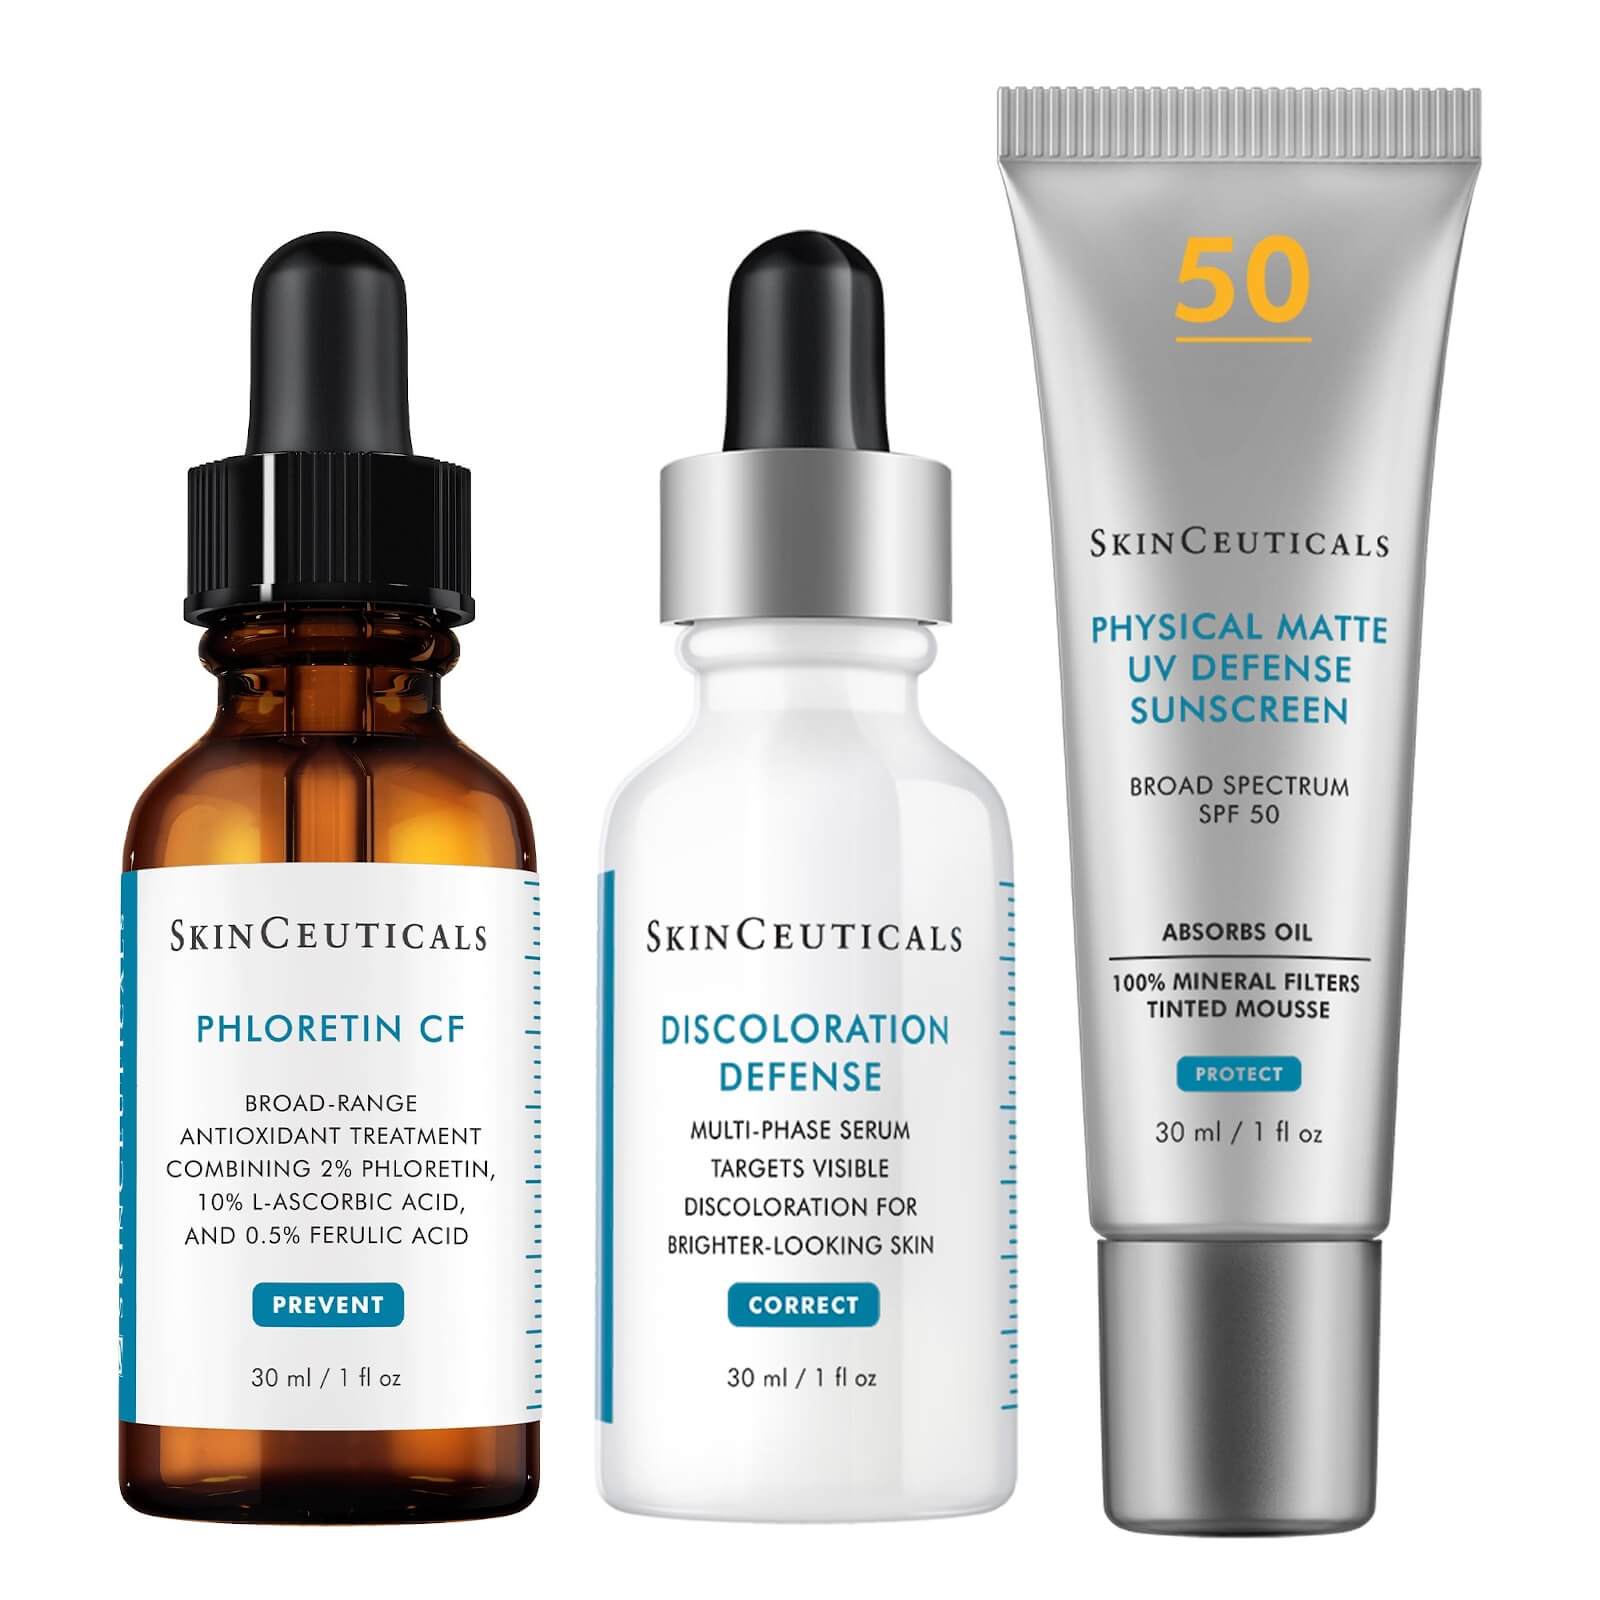 Skinceuticals Vitamin C And Mineral Sunscreen Kit For Discoloration